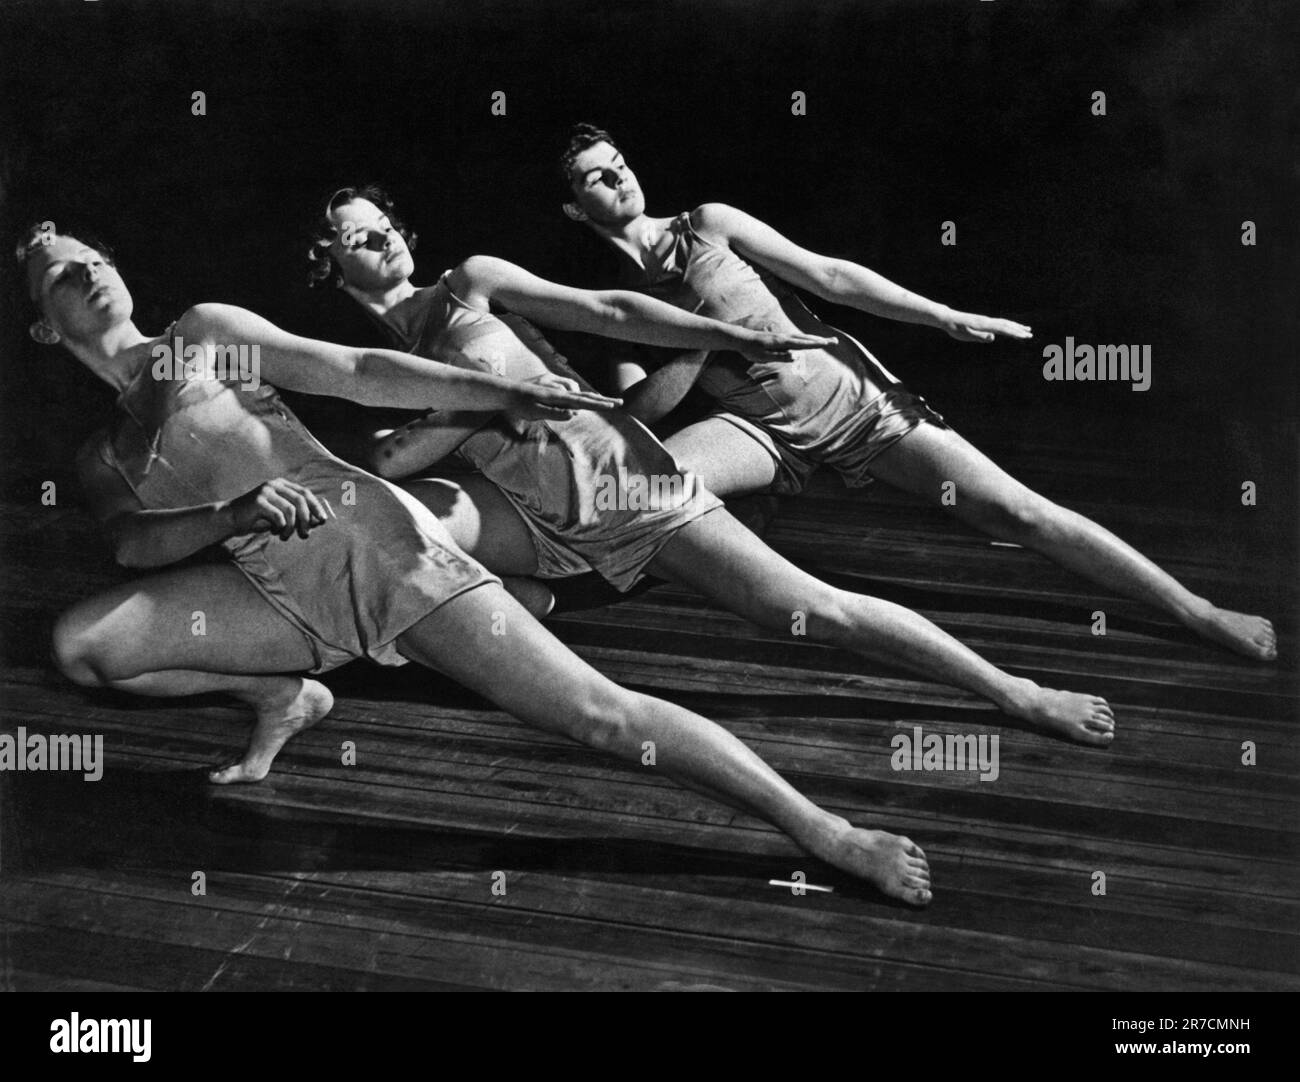 Chicago, Illinois, April, 1948 Members of the Sofia Girl Gymnasts of Sweden will be performing at the Chicago Stadium as part of the 1948 Swedish Pioneer Centennial being presented throughout the Midwest. Stock Photo